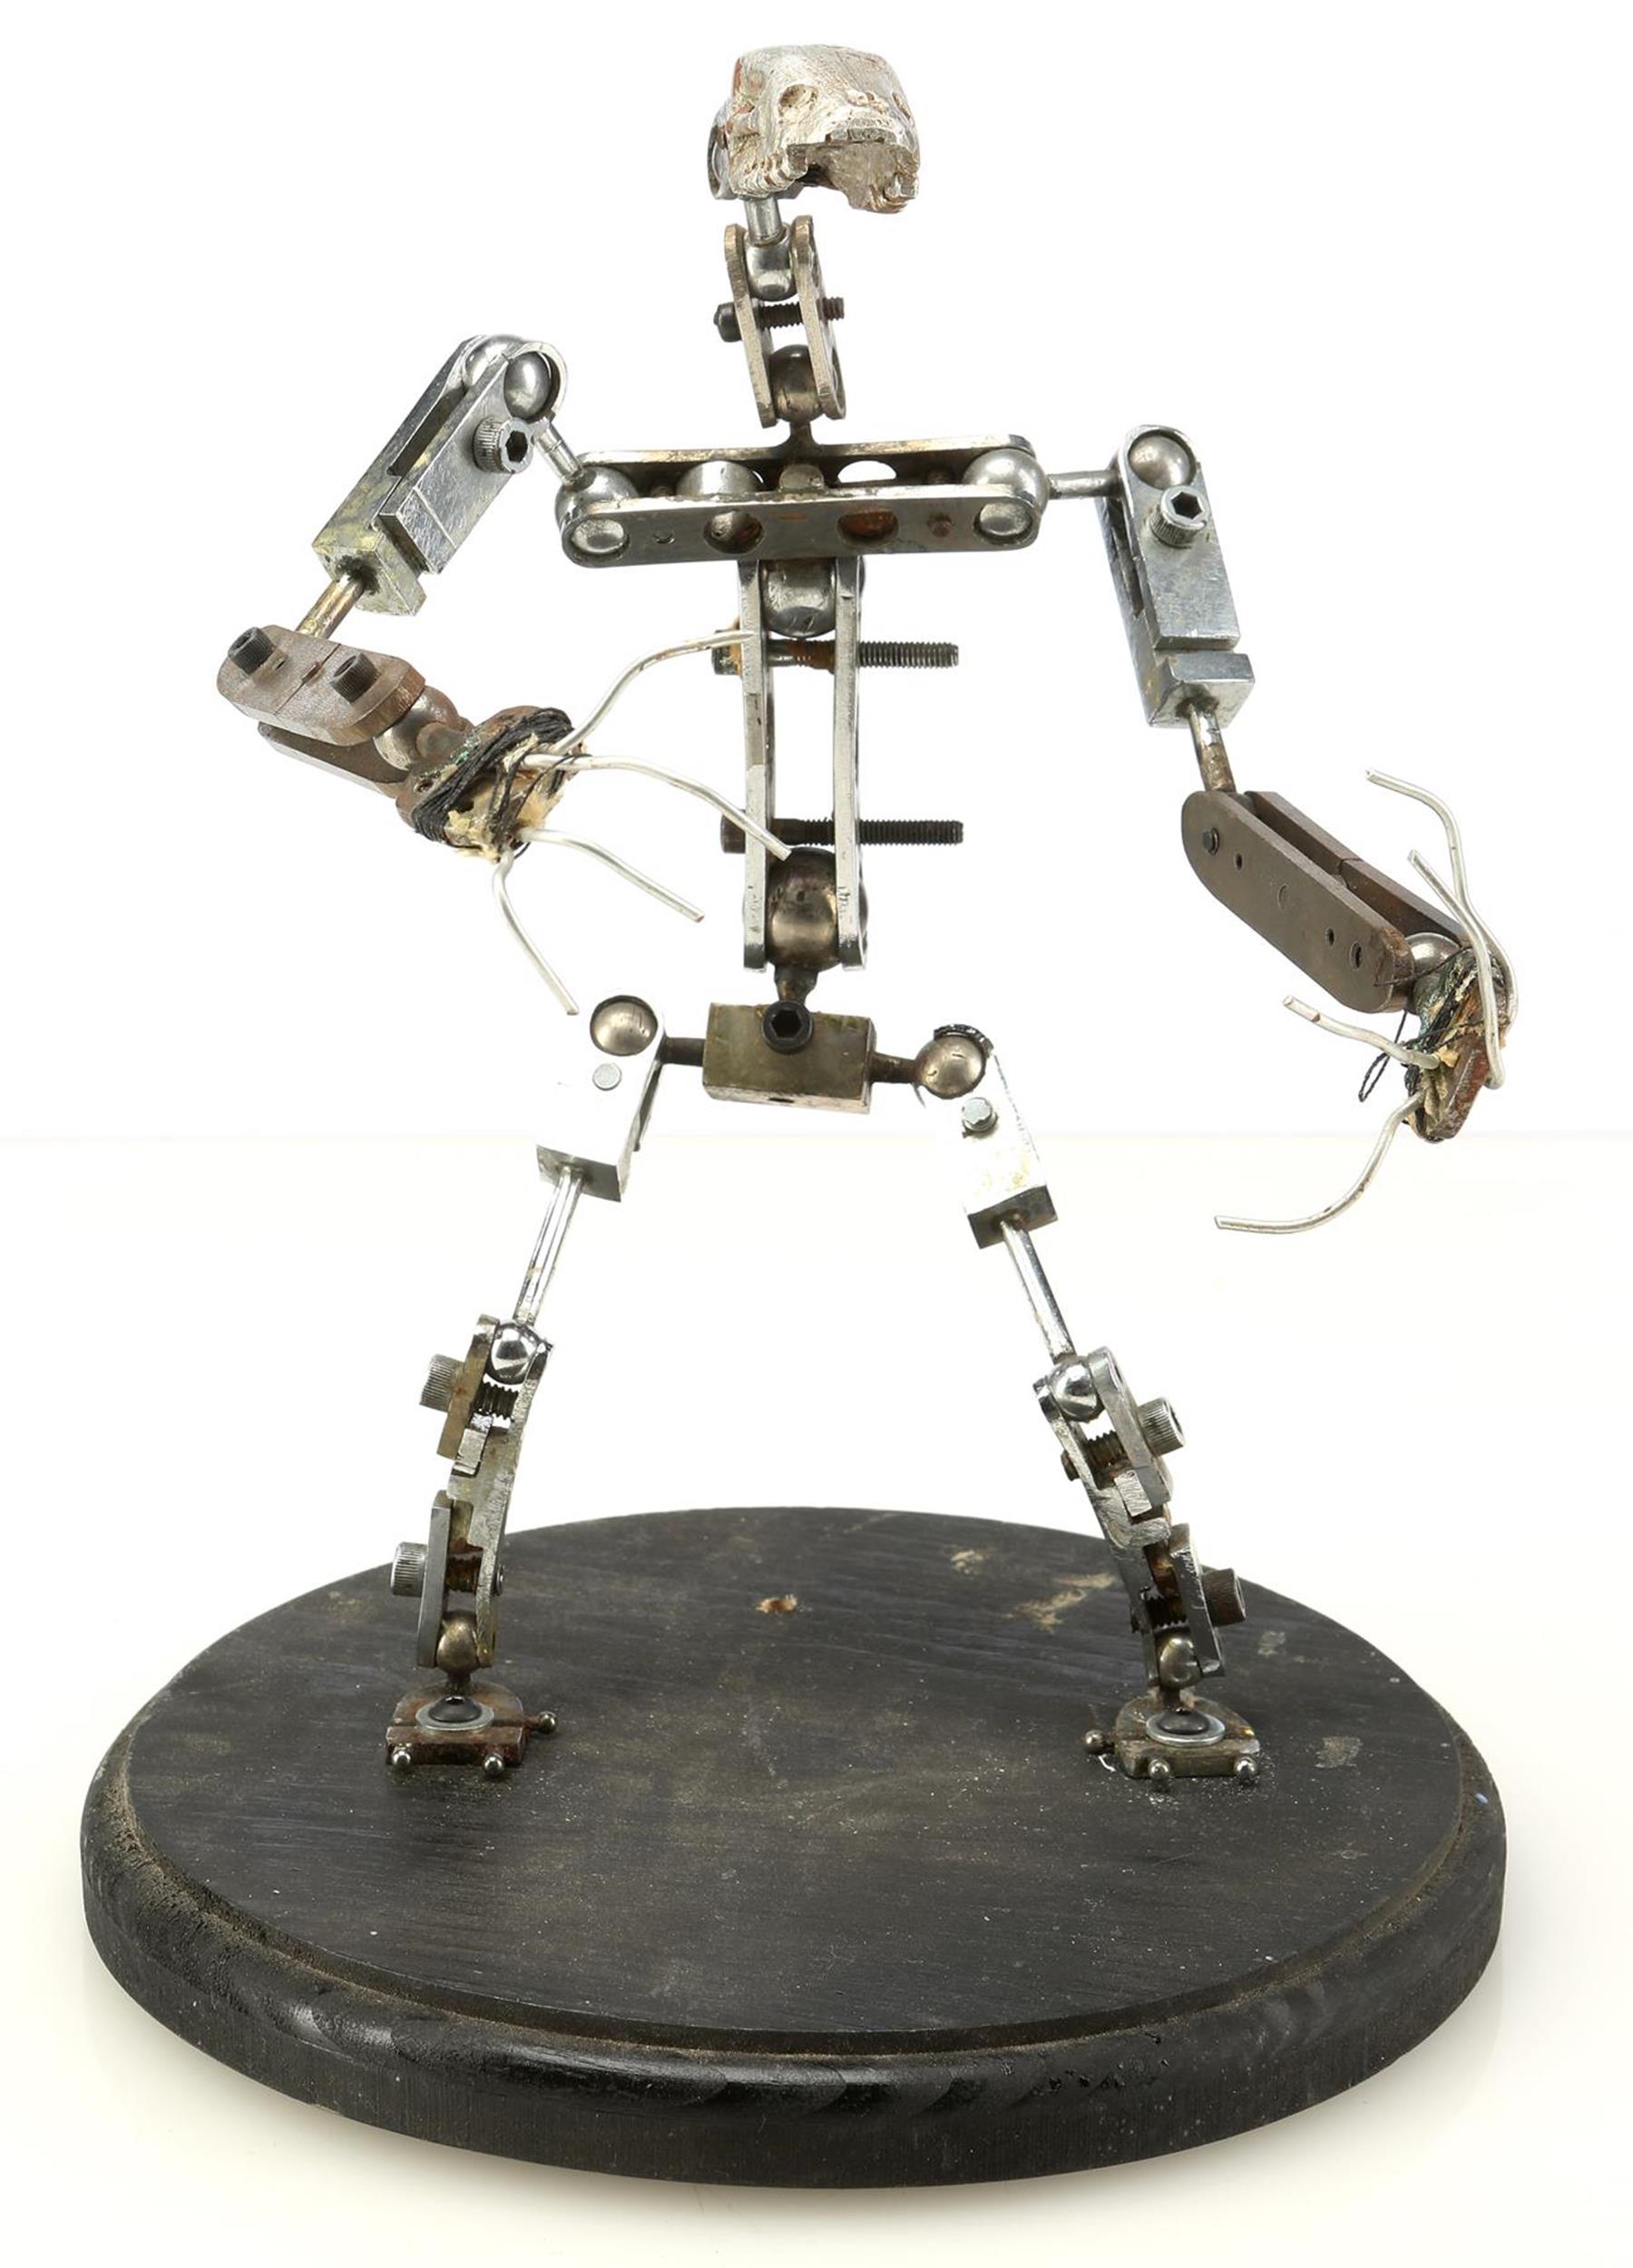 Armature for Key Chess Piece